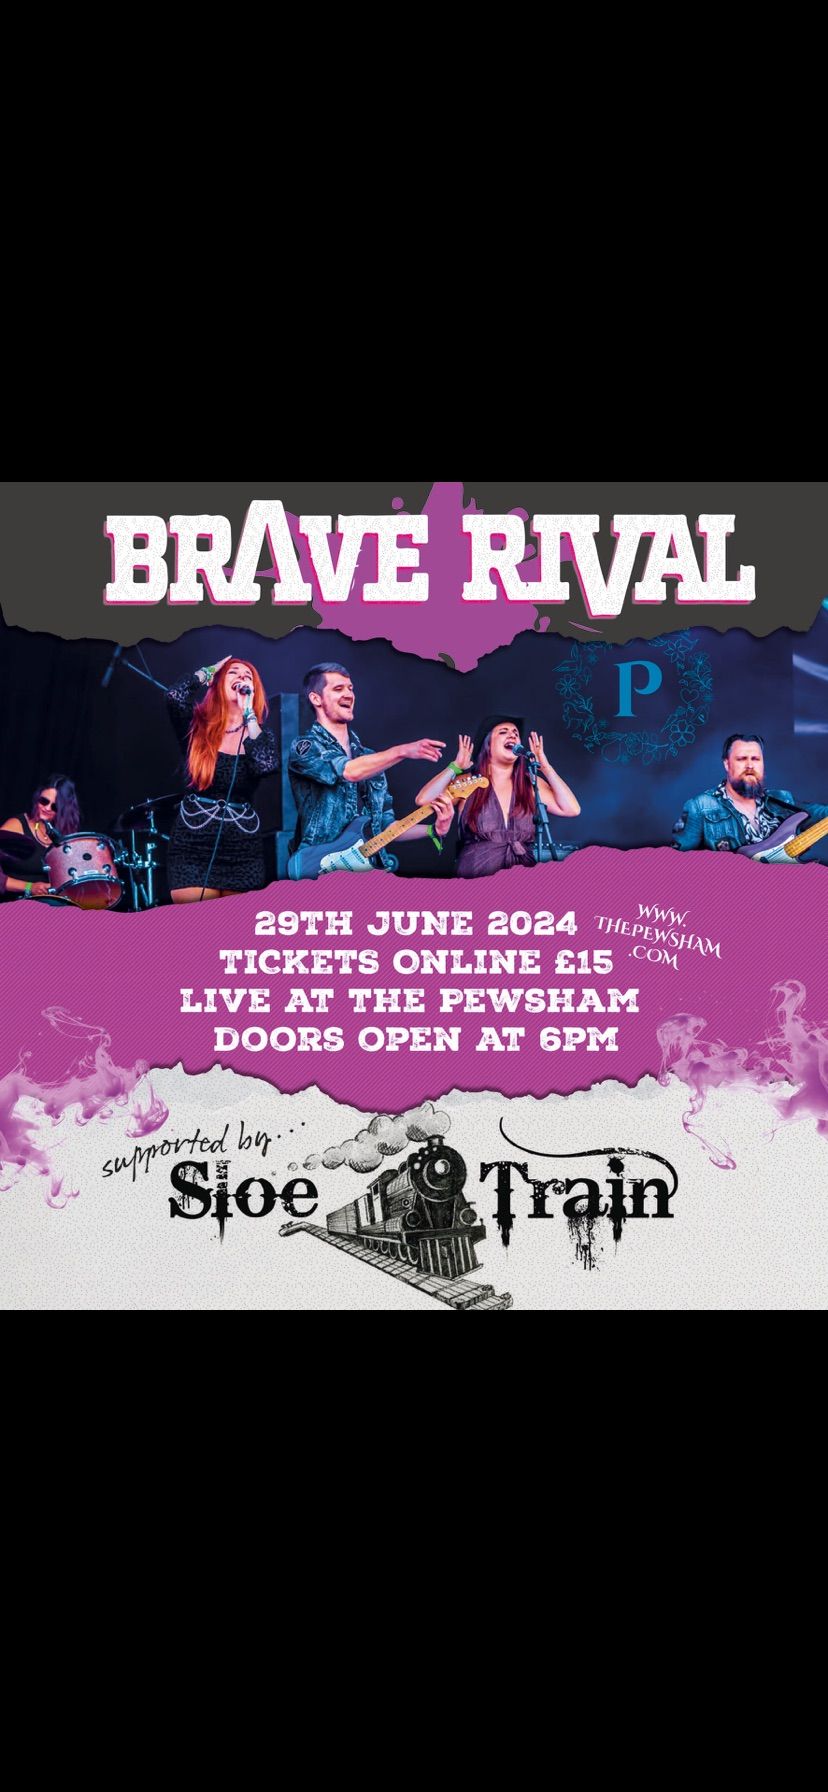 Brave Rival and Sloetrain - Blues rock